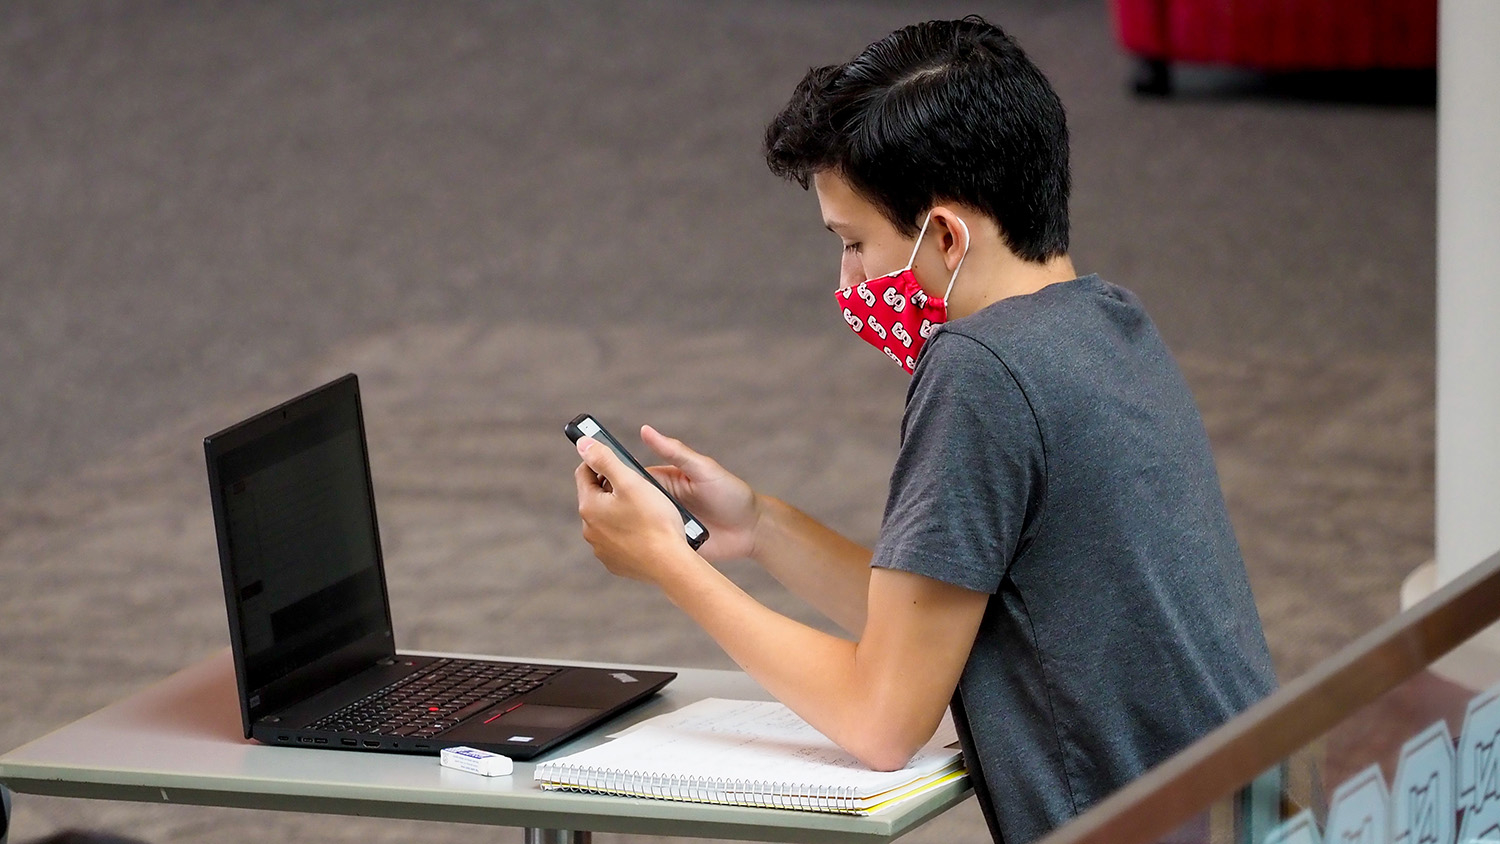 Students find places to study in the Talley Student Center on the last day of in-person classes, before all undergraduate classes moved online for the fall 2020 semester.